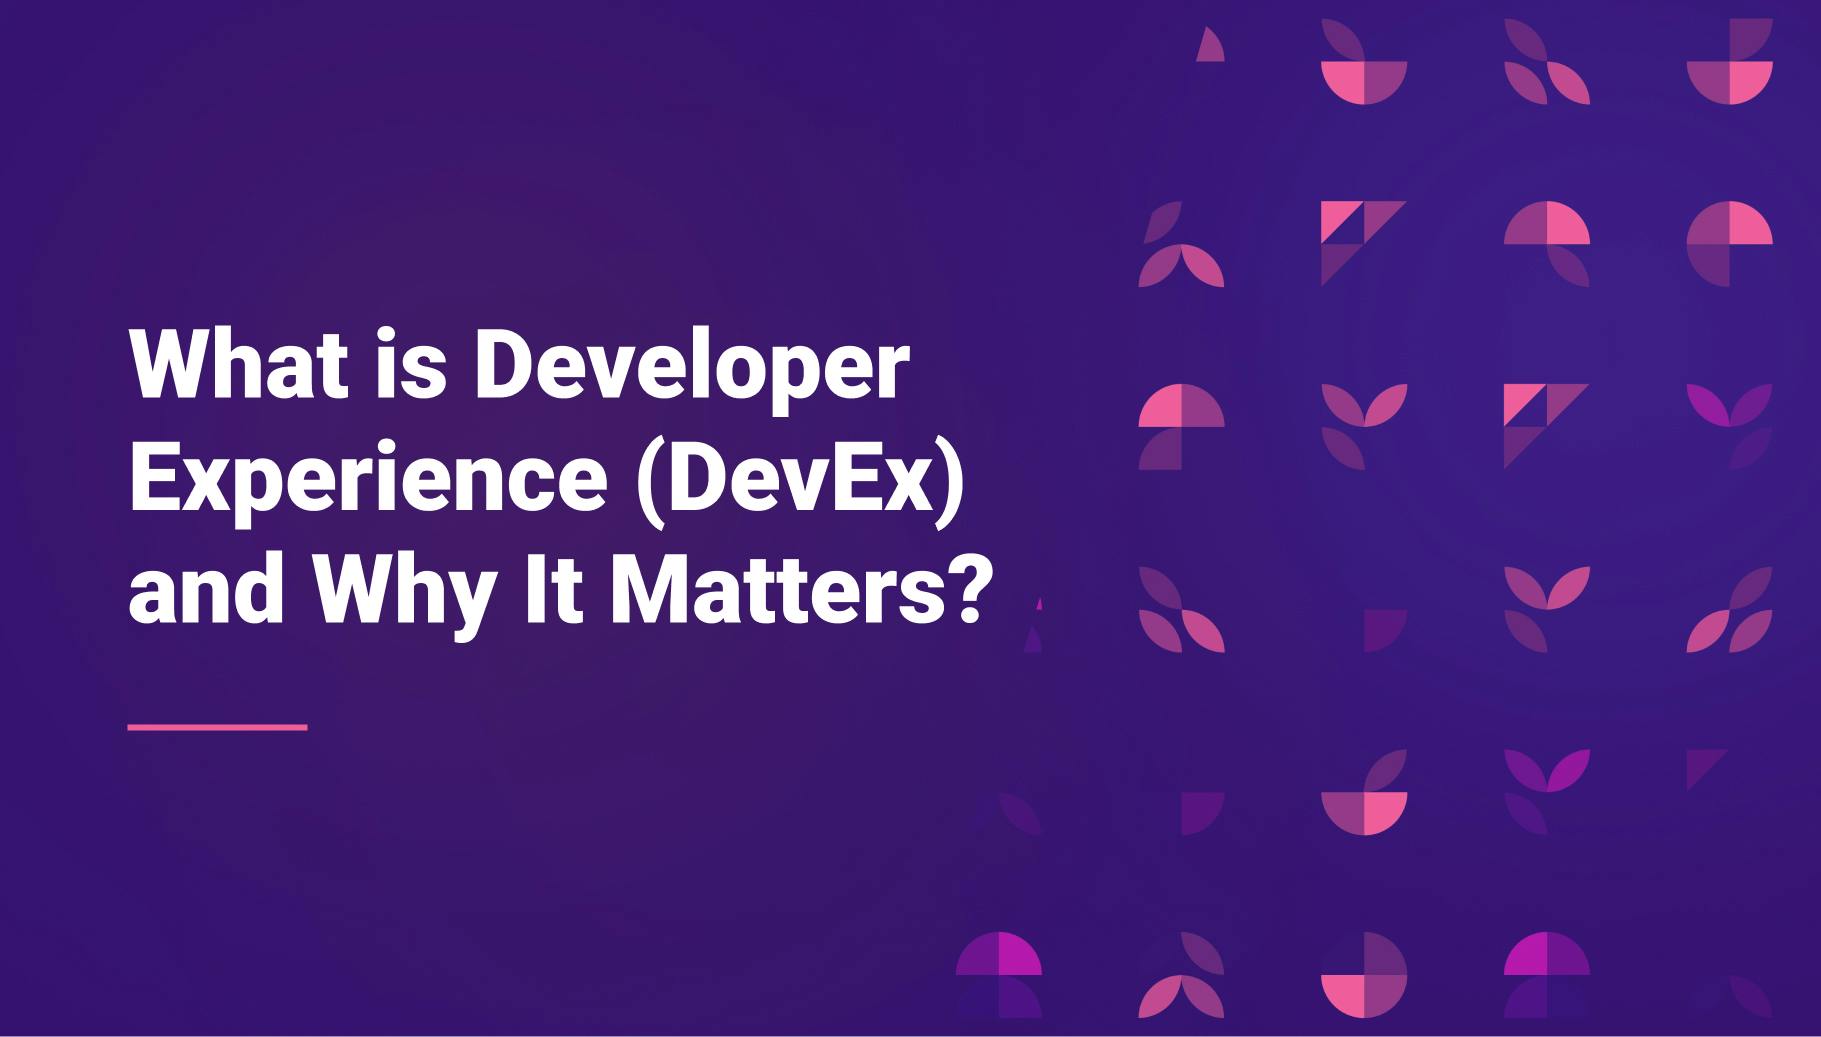 What is Developer Experience (DevEx) and Why It Matters?  - Qovery